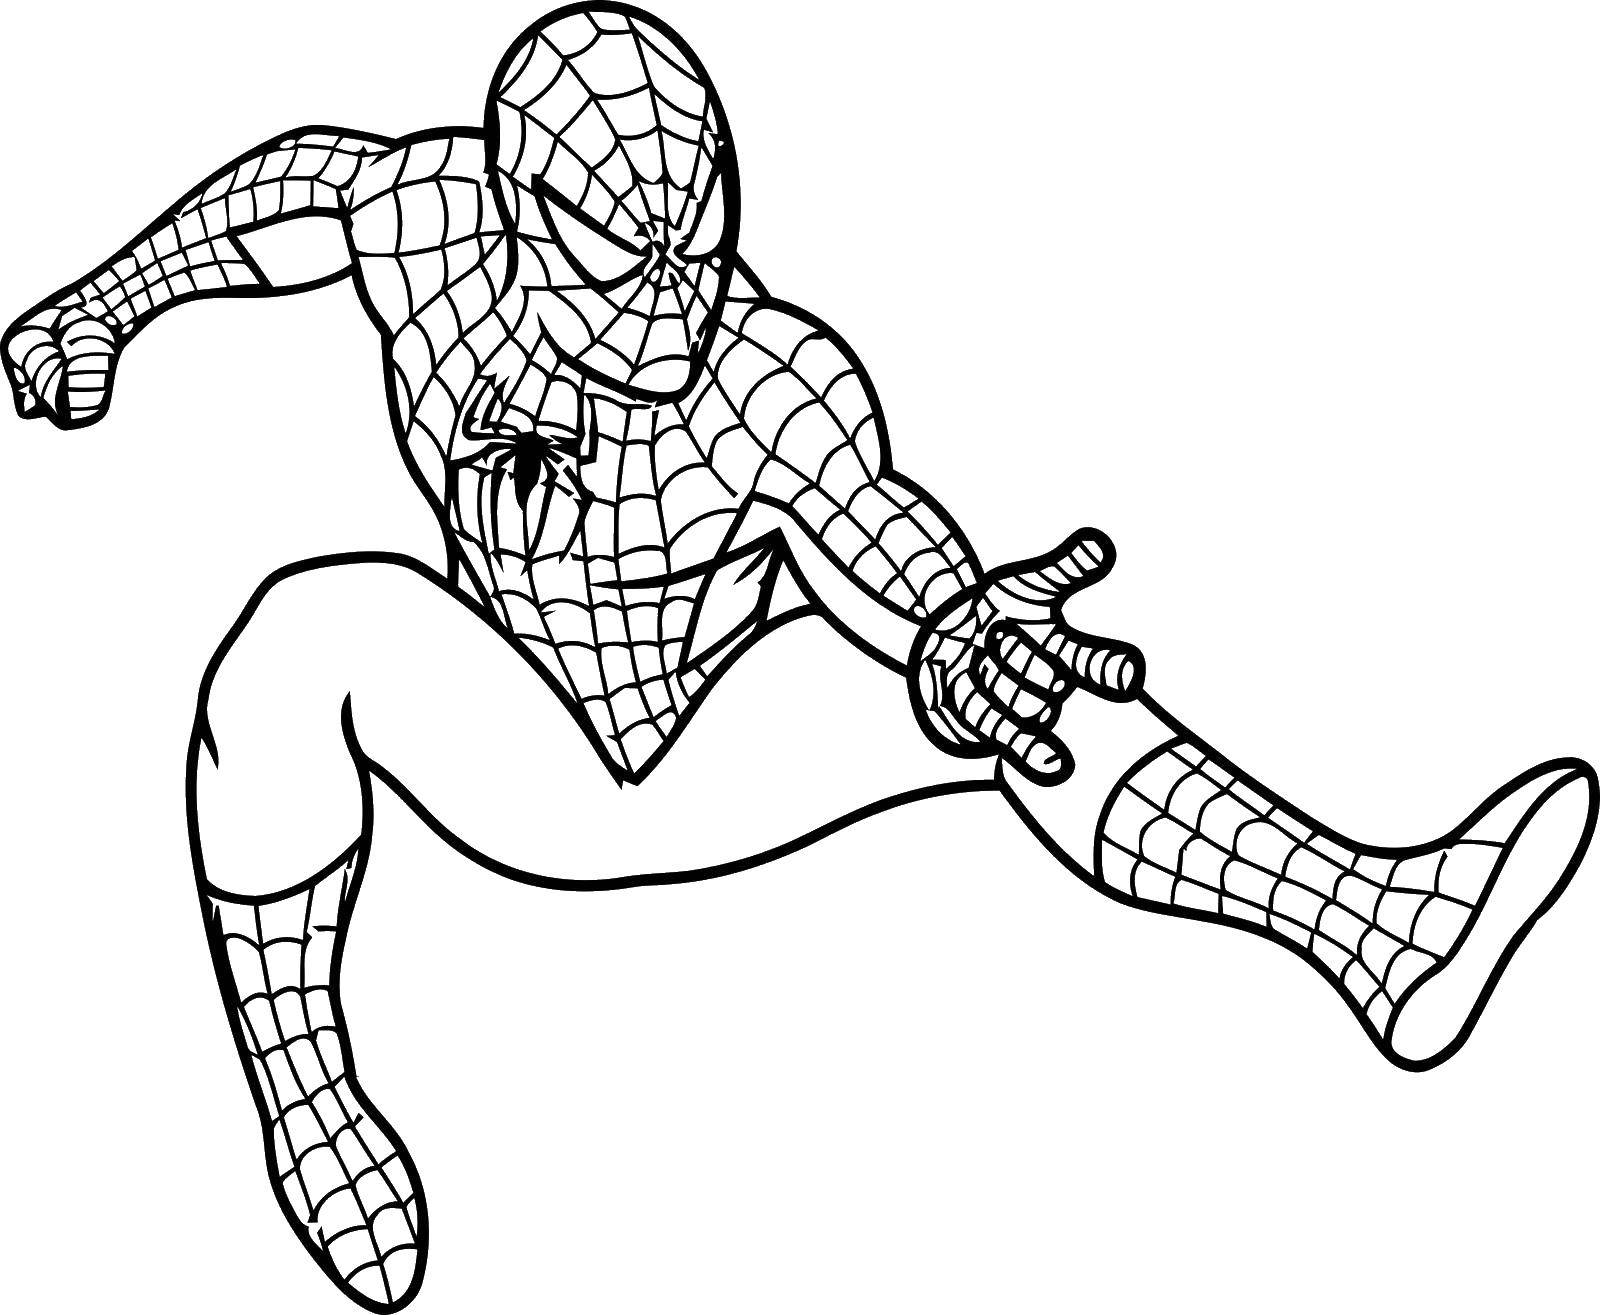 Coloring Spider-man and web. Category superheroes. Tags:  spider man, spider web , super hero.